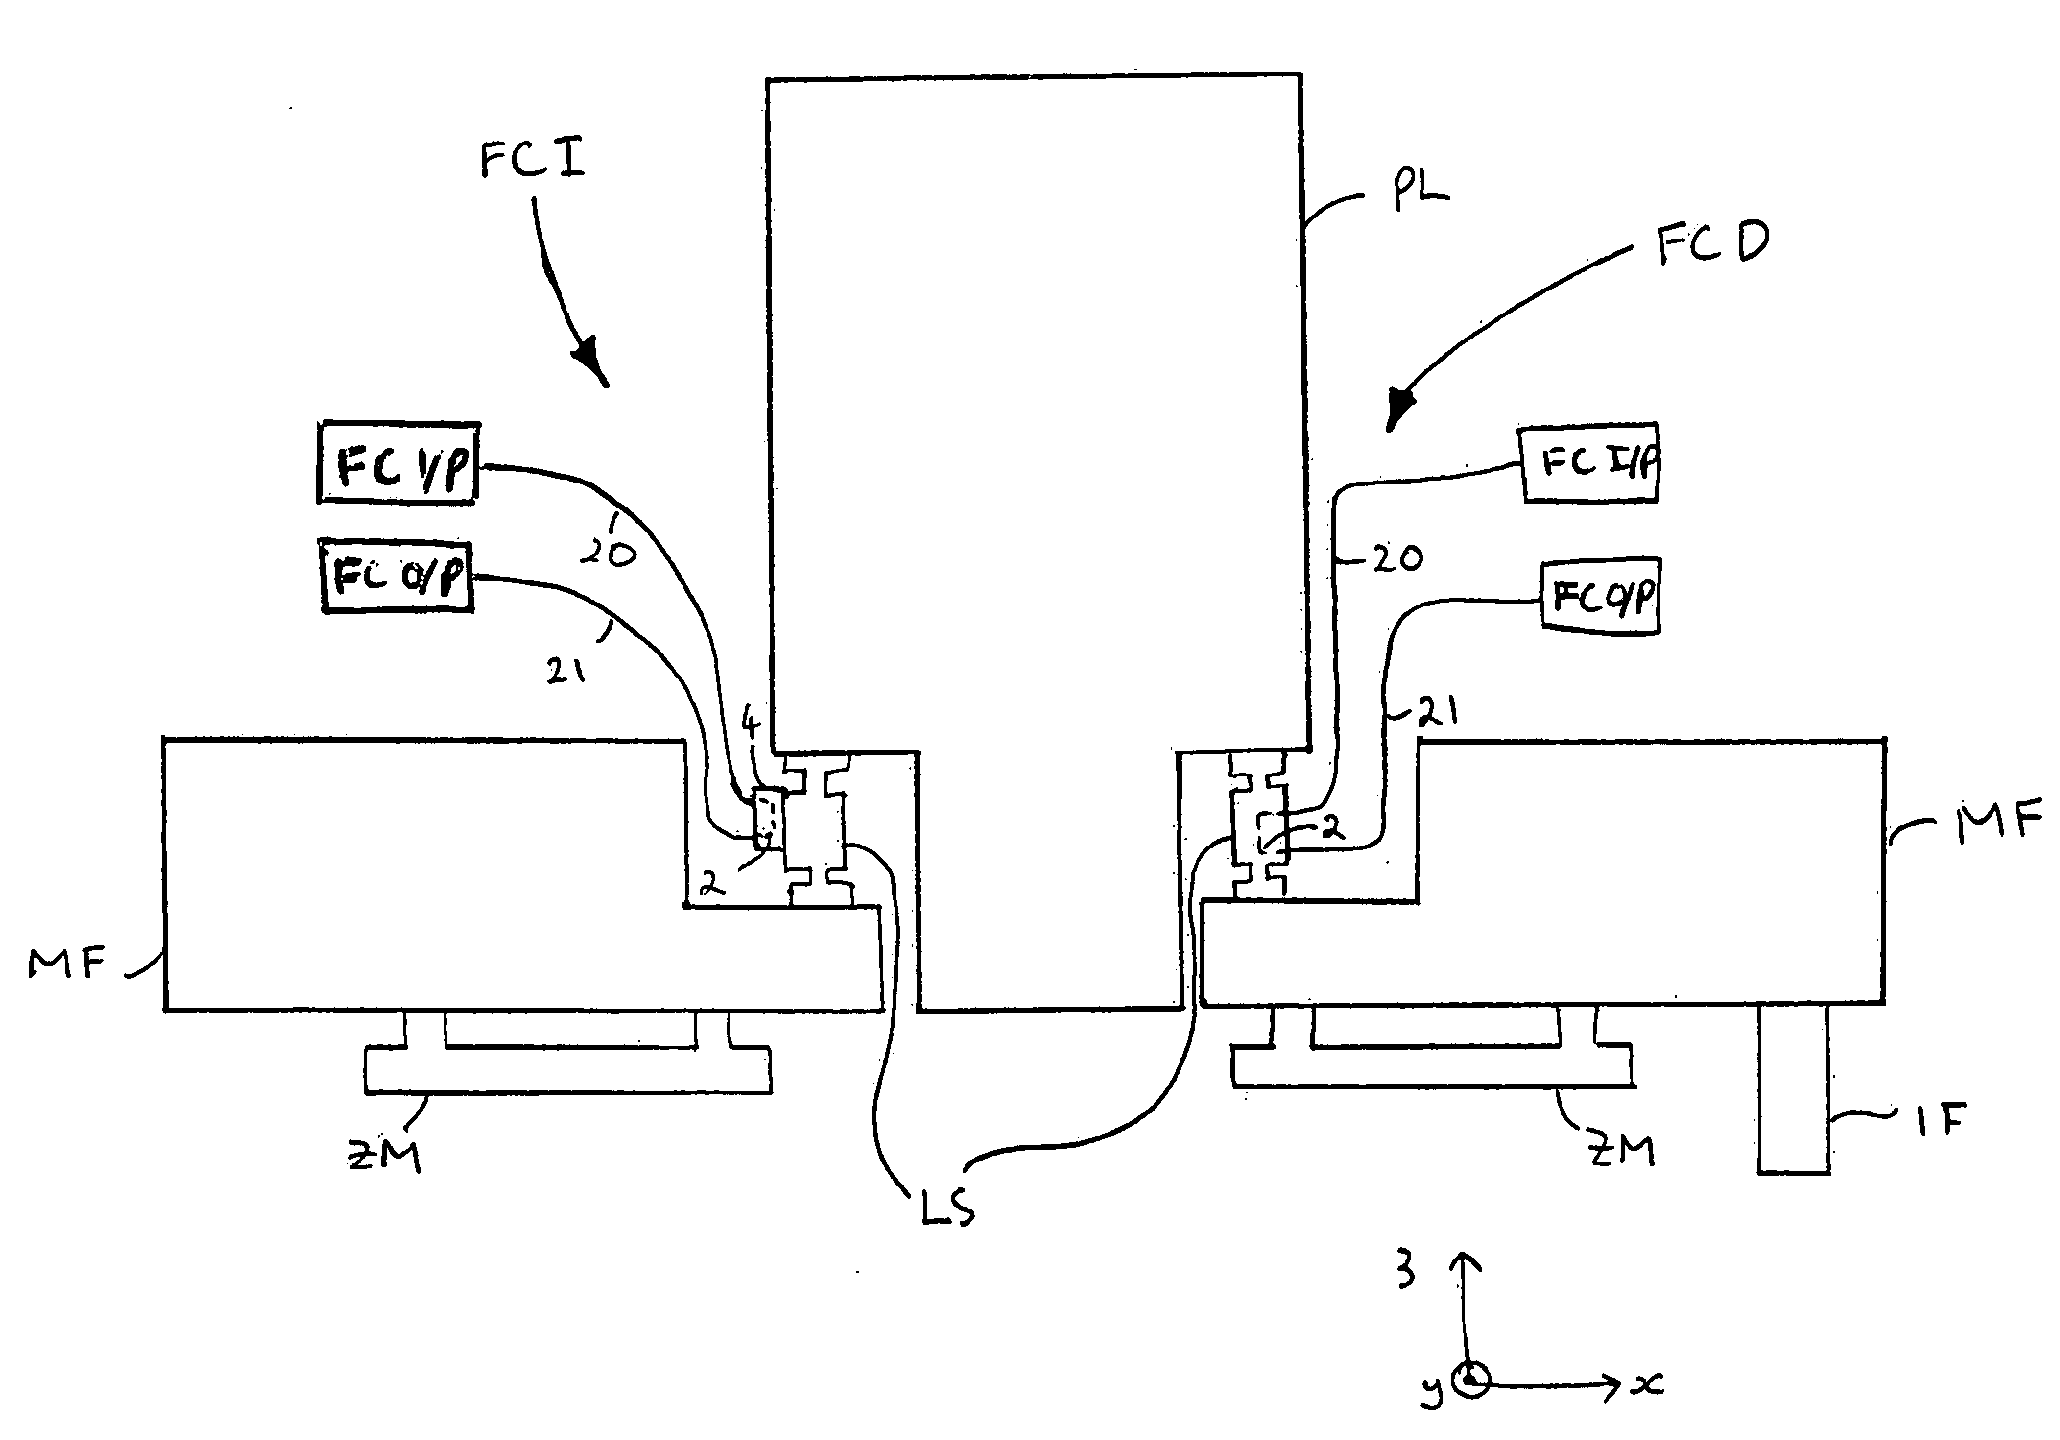 Lithographic apparatus, thermal conditioning system, and method for manufacturing a device